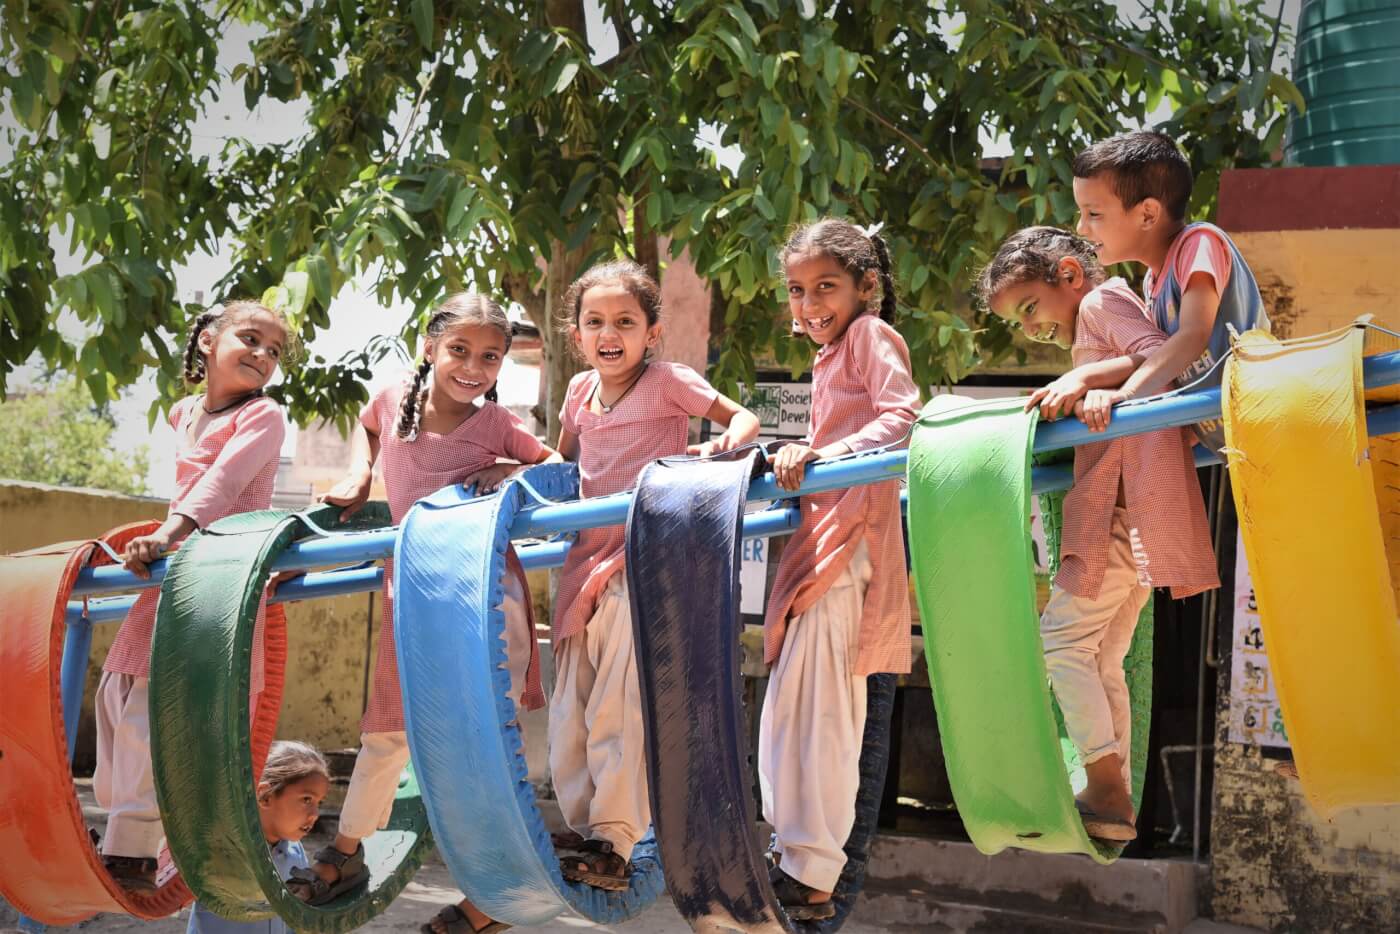 Smiling children on a playground in India